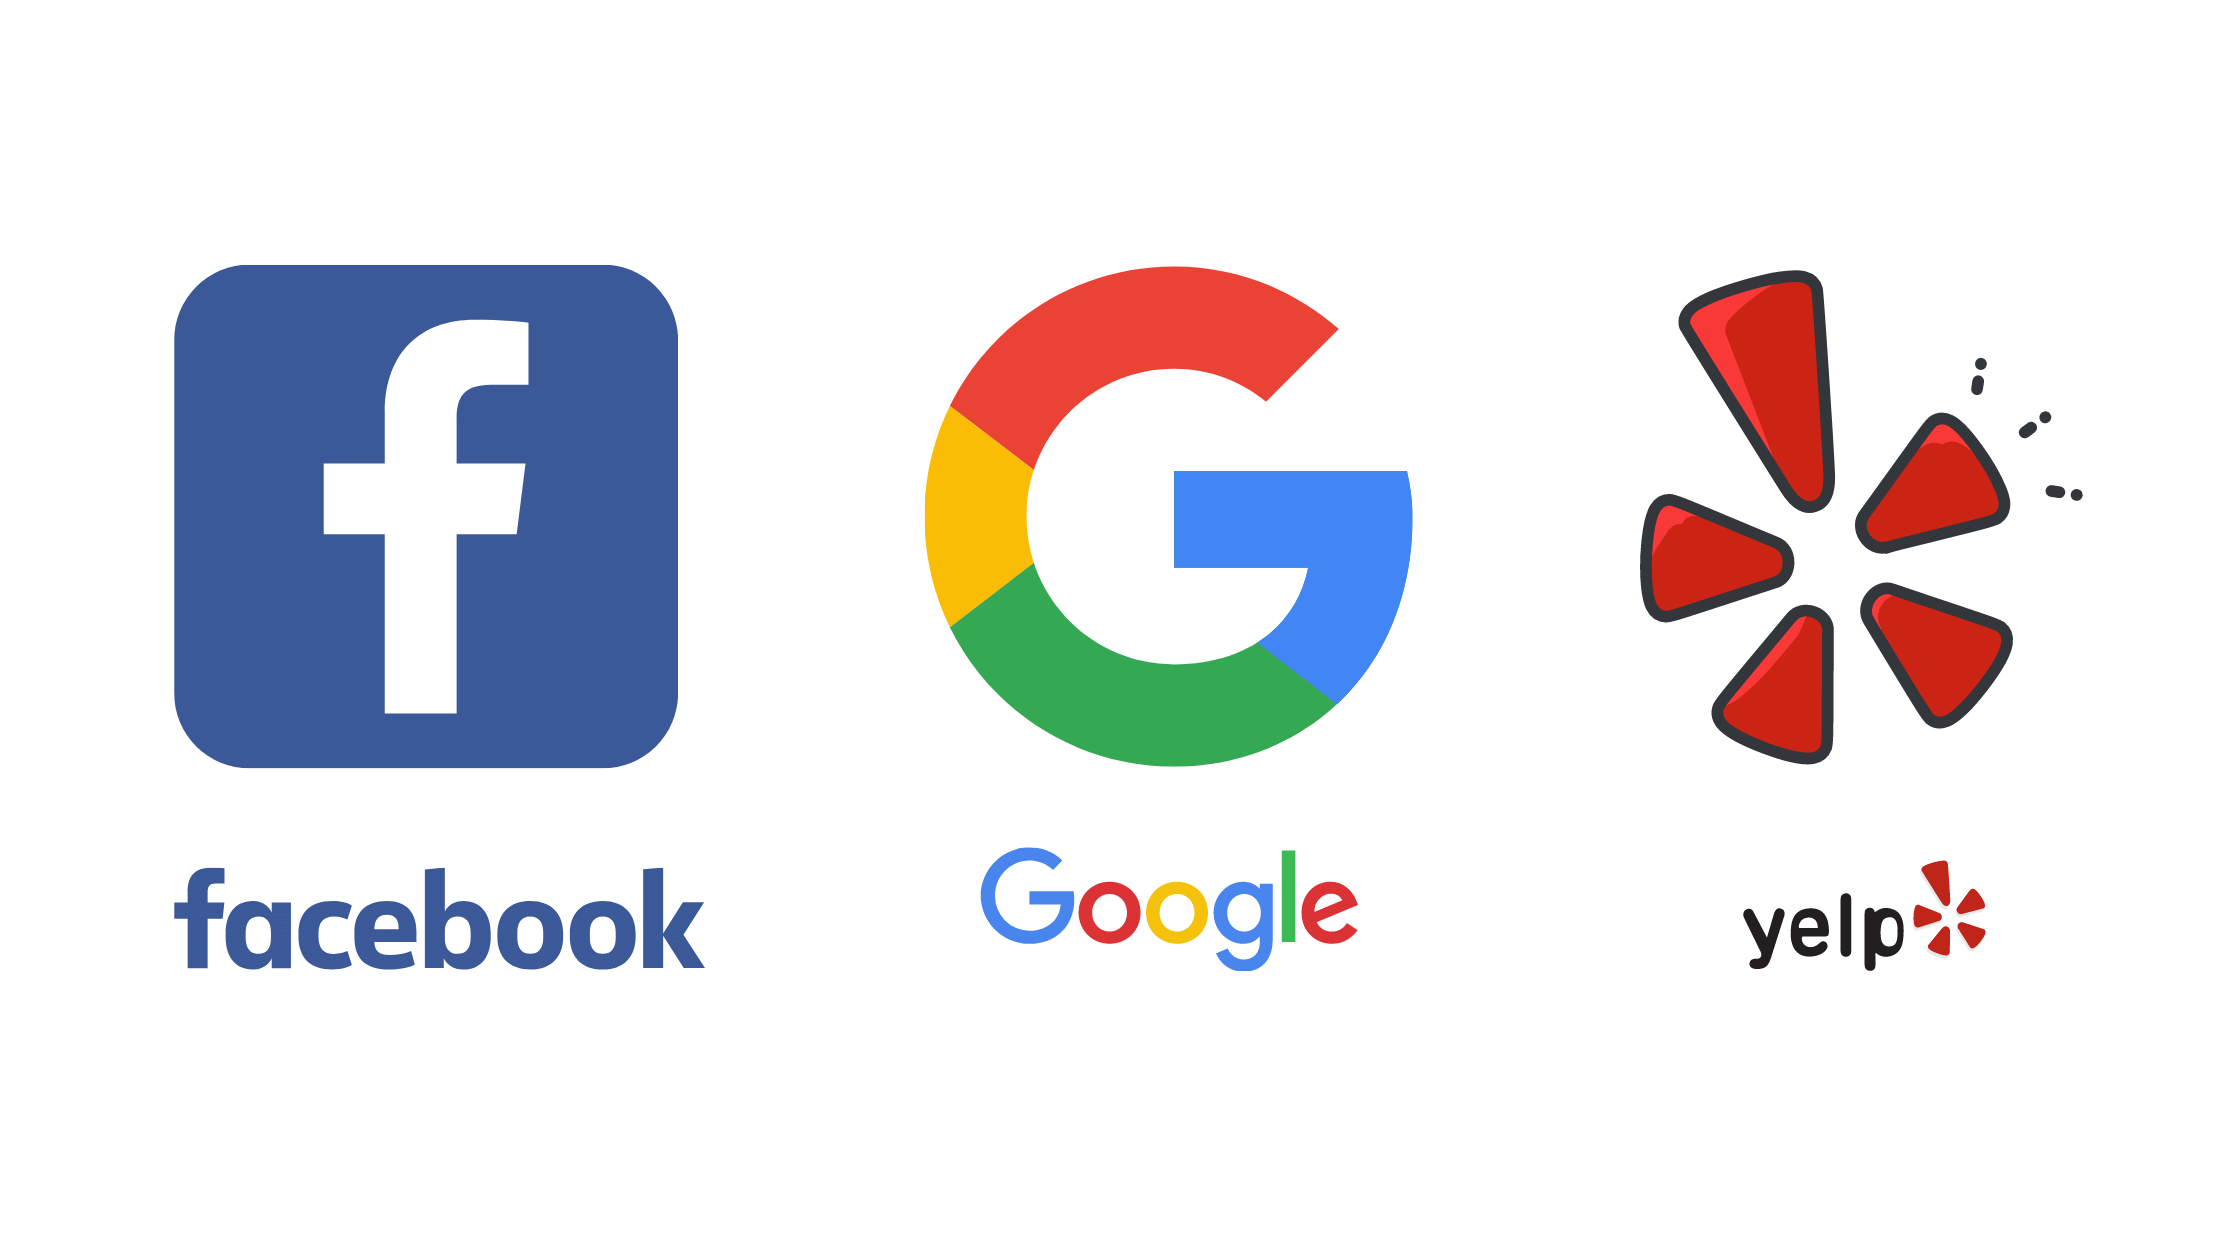 Yelp, Google My Business, and Facebook